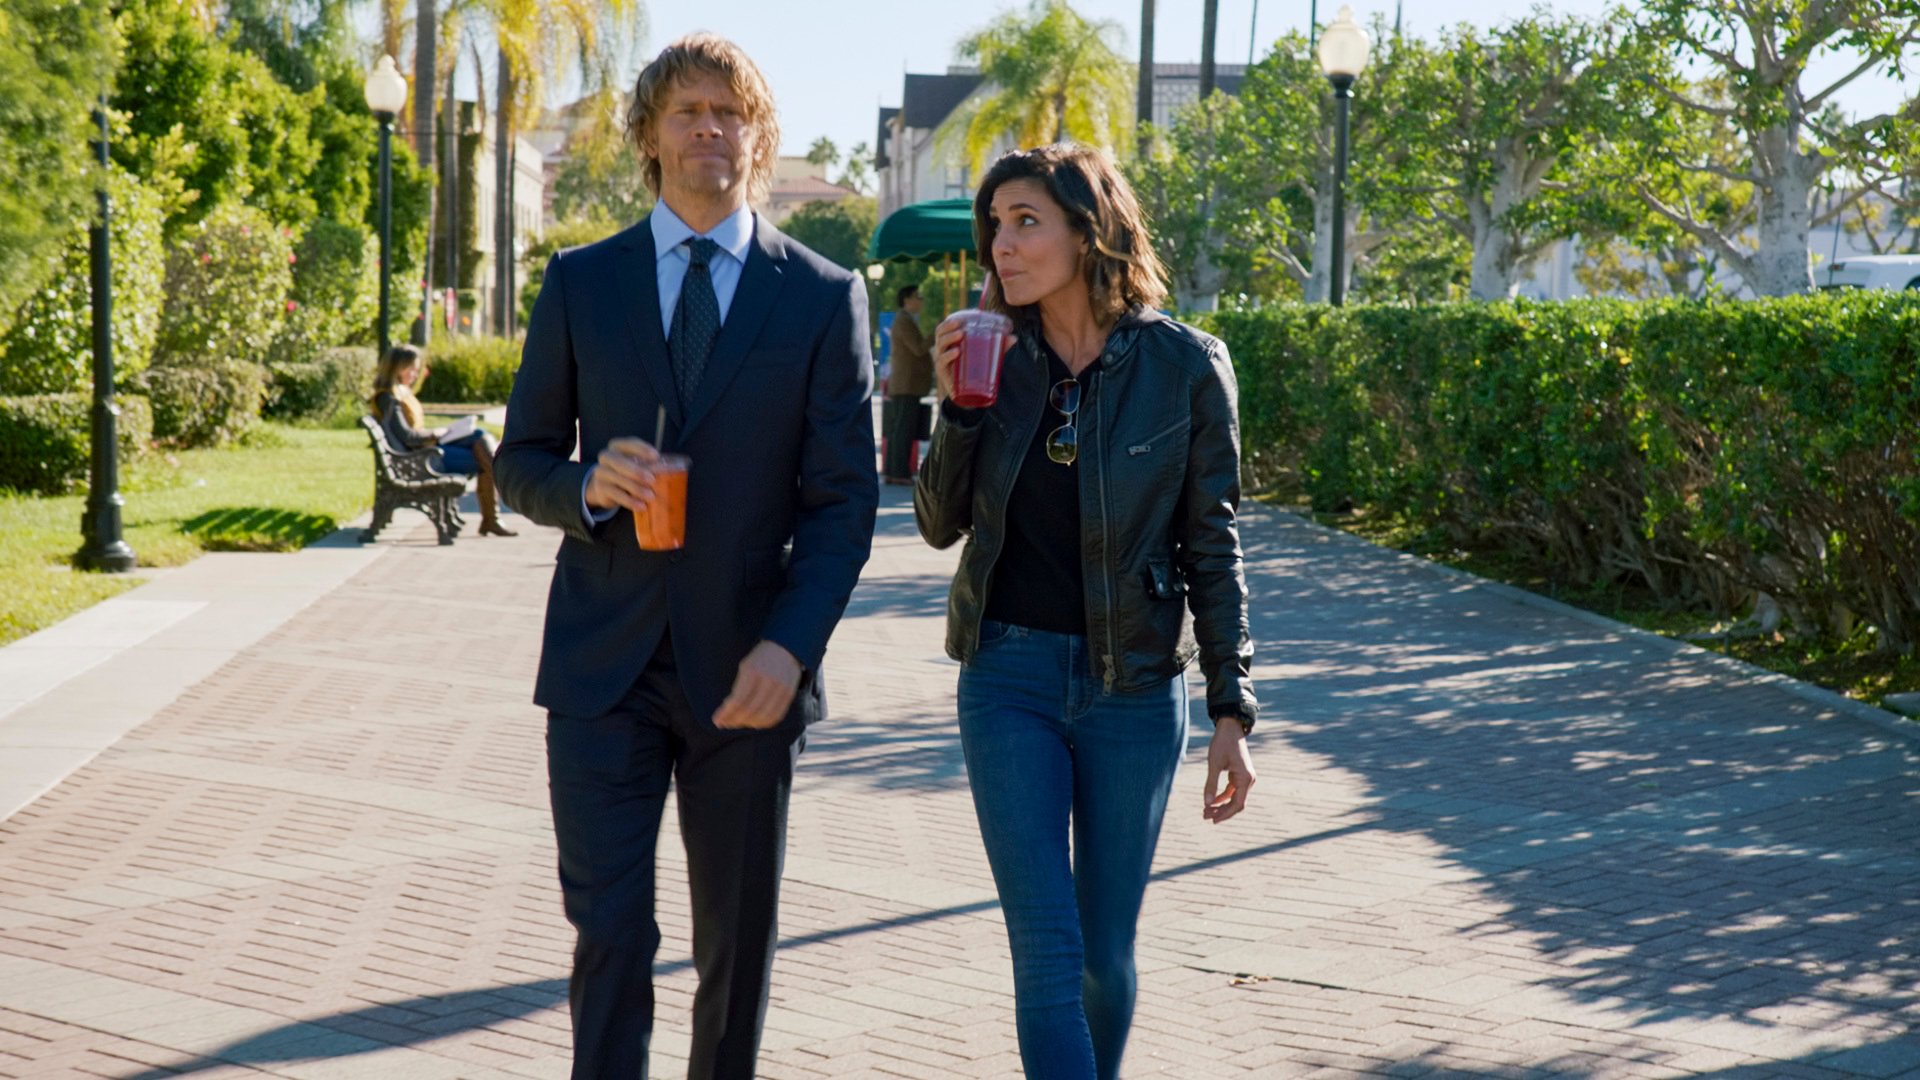 Kensi and Deeks get ready for his FLETC interview on NCIS Los Angeles |  CBS via Getty Images